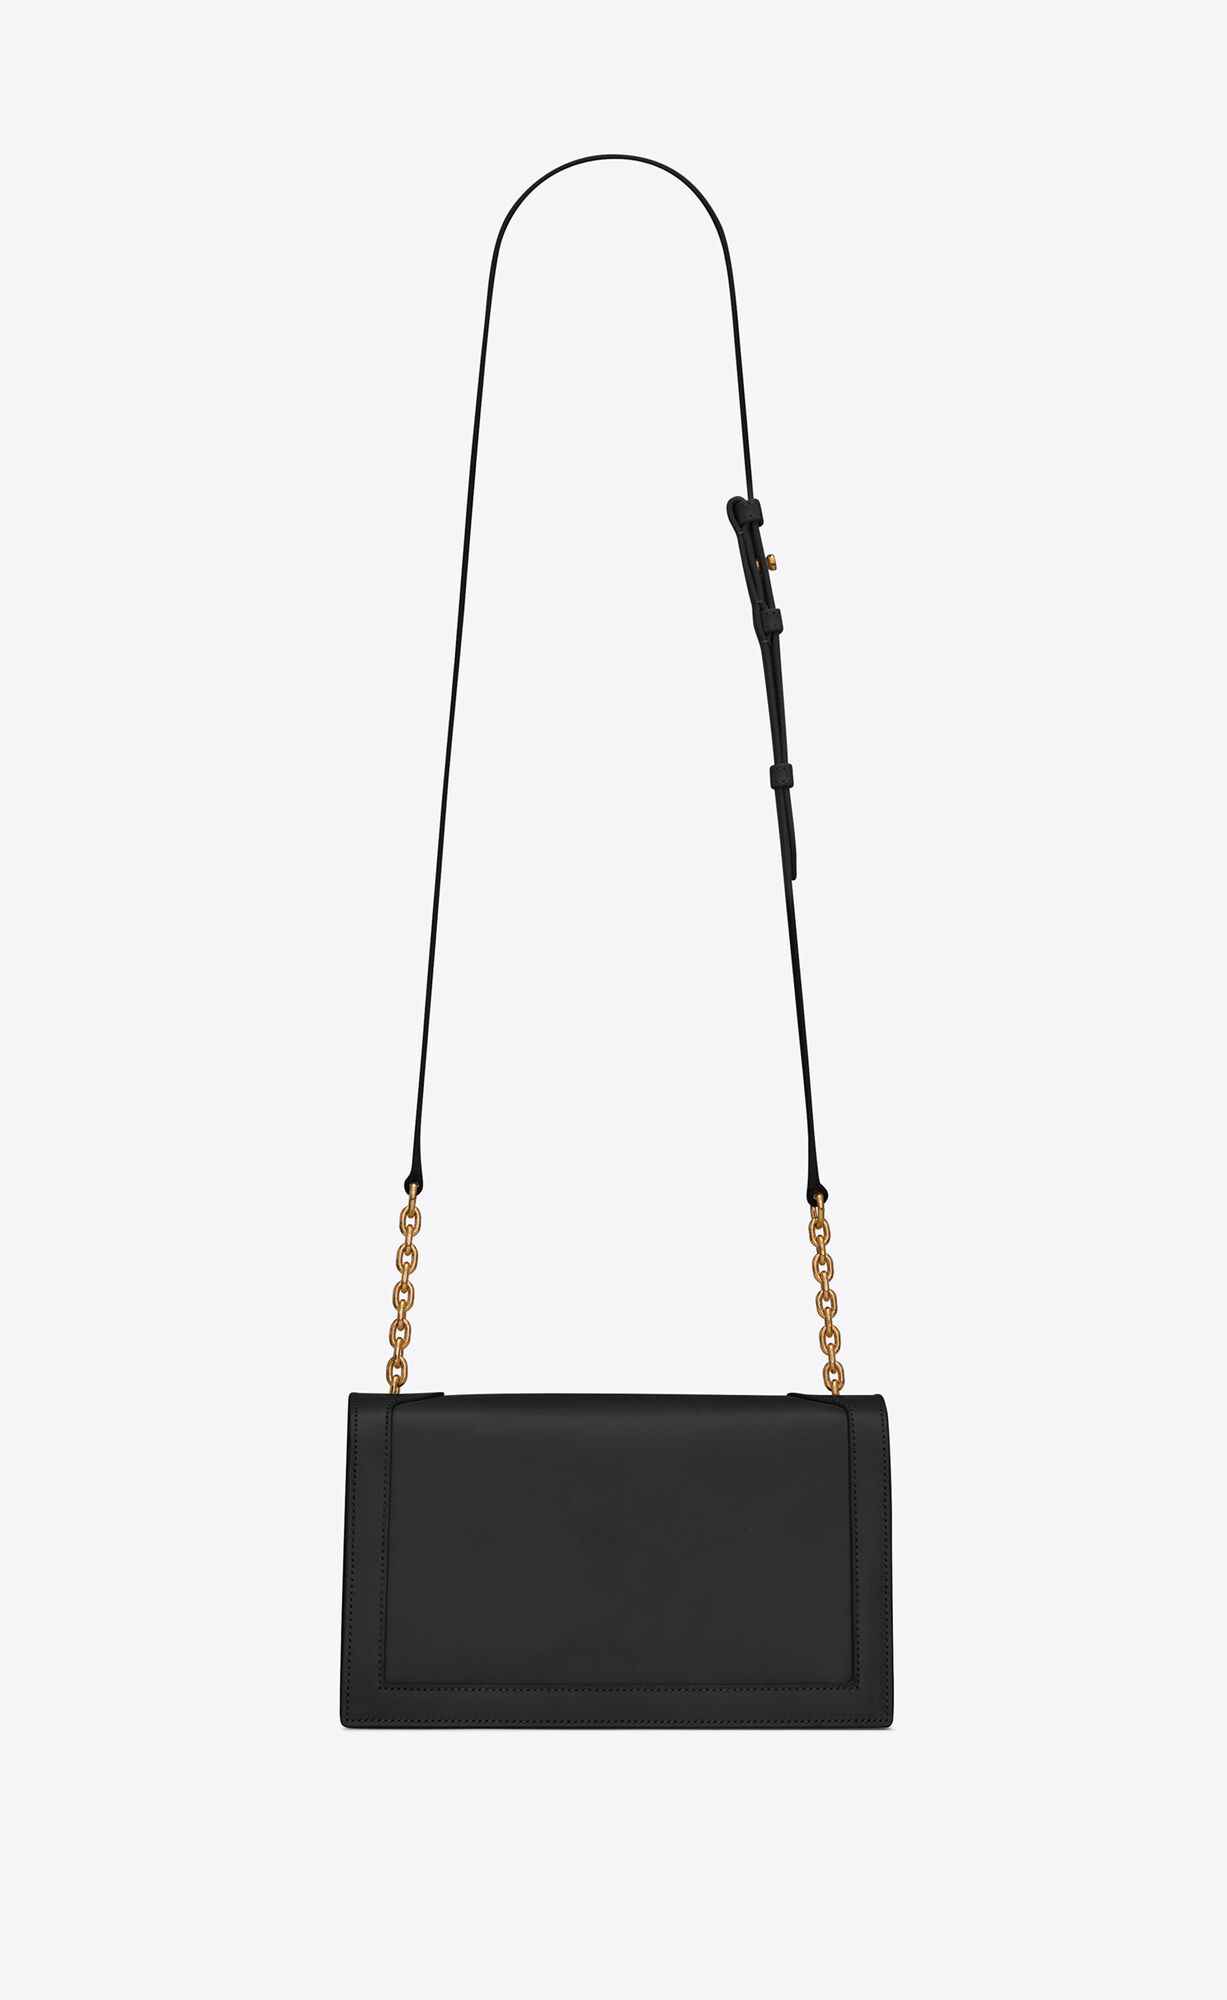 BOOK BAG in smooth leather | Saint Laurent United States | YSL.com